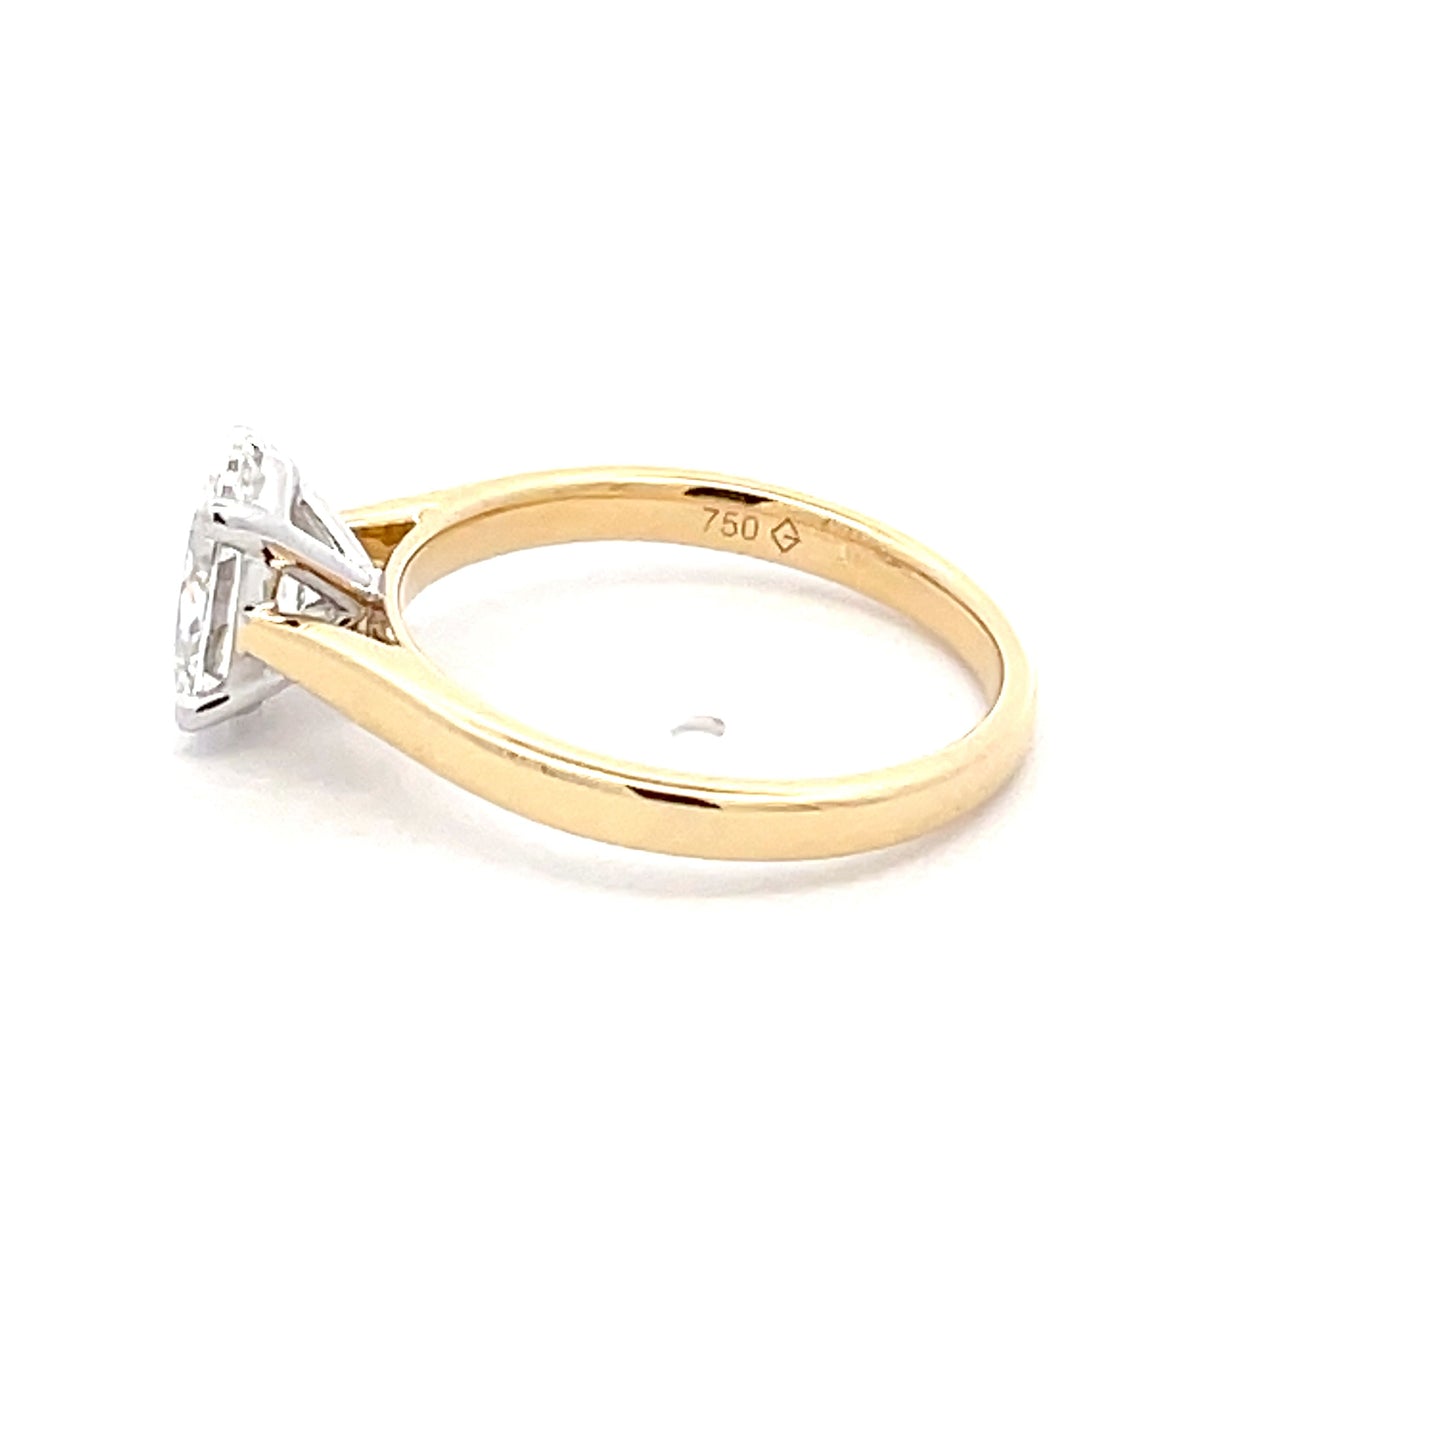 LAB GROWN OVAL SHAPED DIAMOND SOLITAIRE RING - 1.21CTS  Gardiner Brothers   